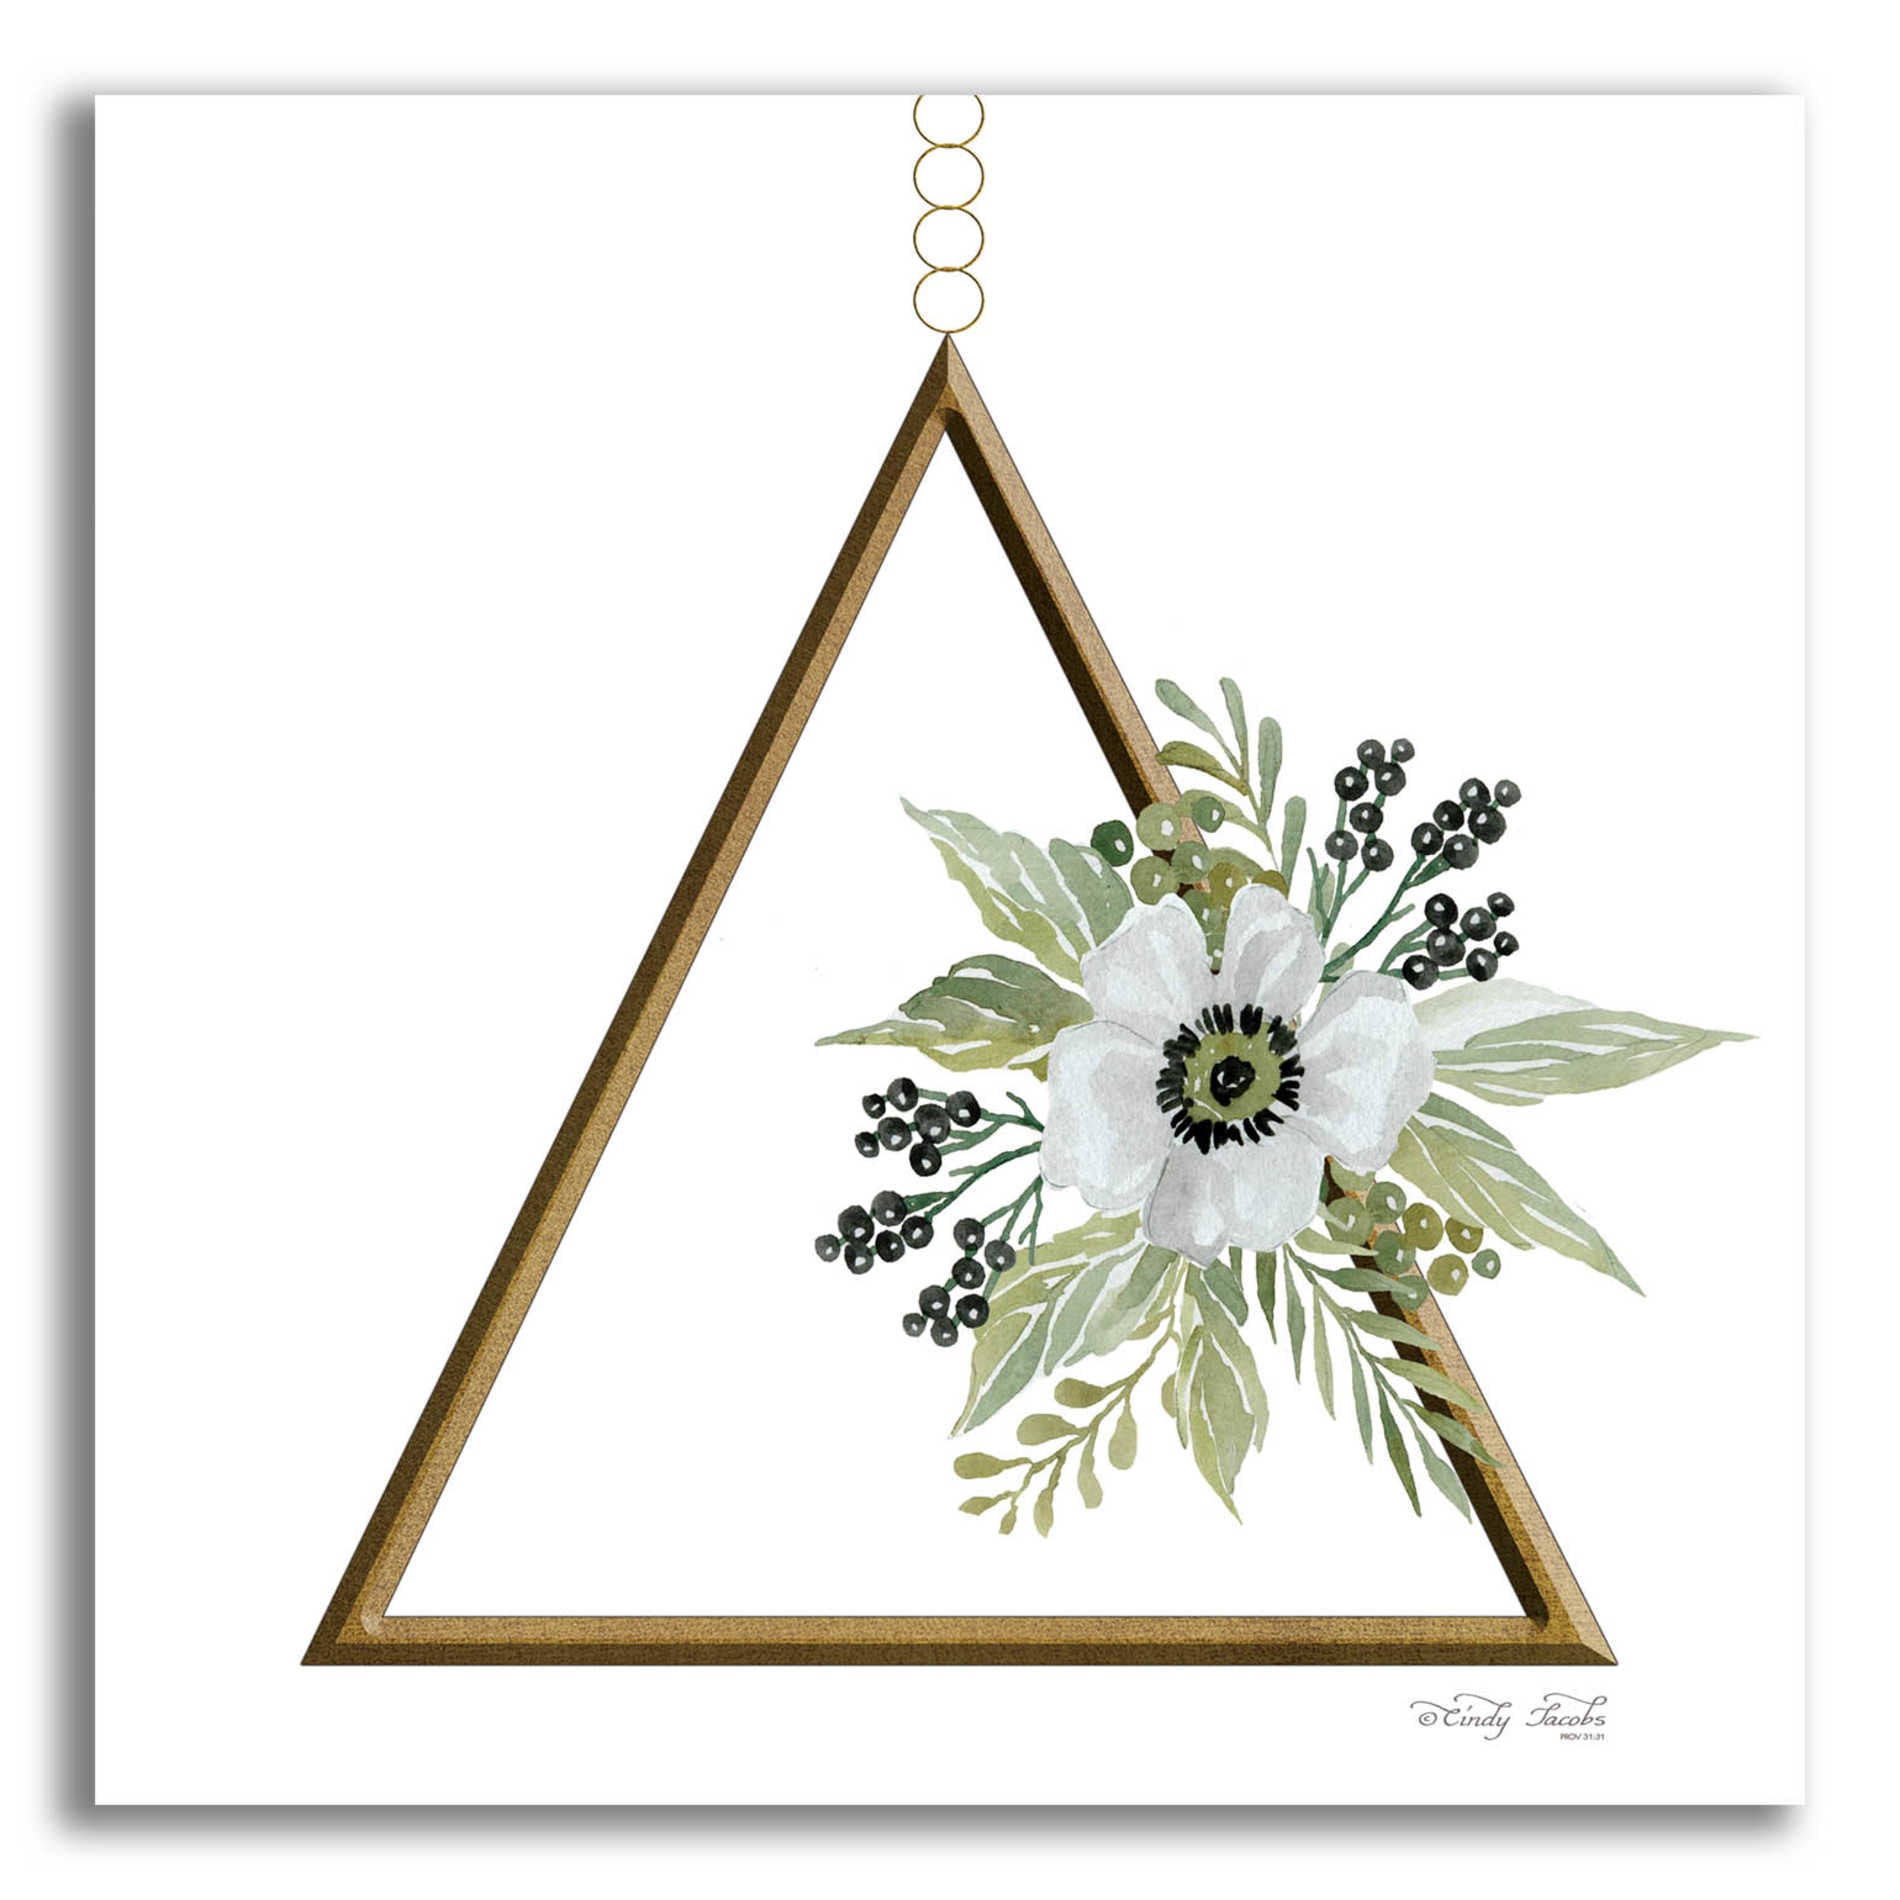 Epic Art 'Geometric Triangle Muted Floral II' by Cindy Jacobs, Acrylic Glass Wall Art